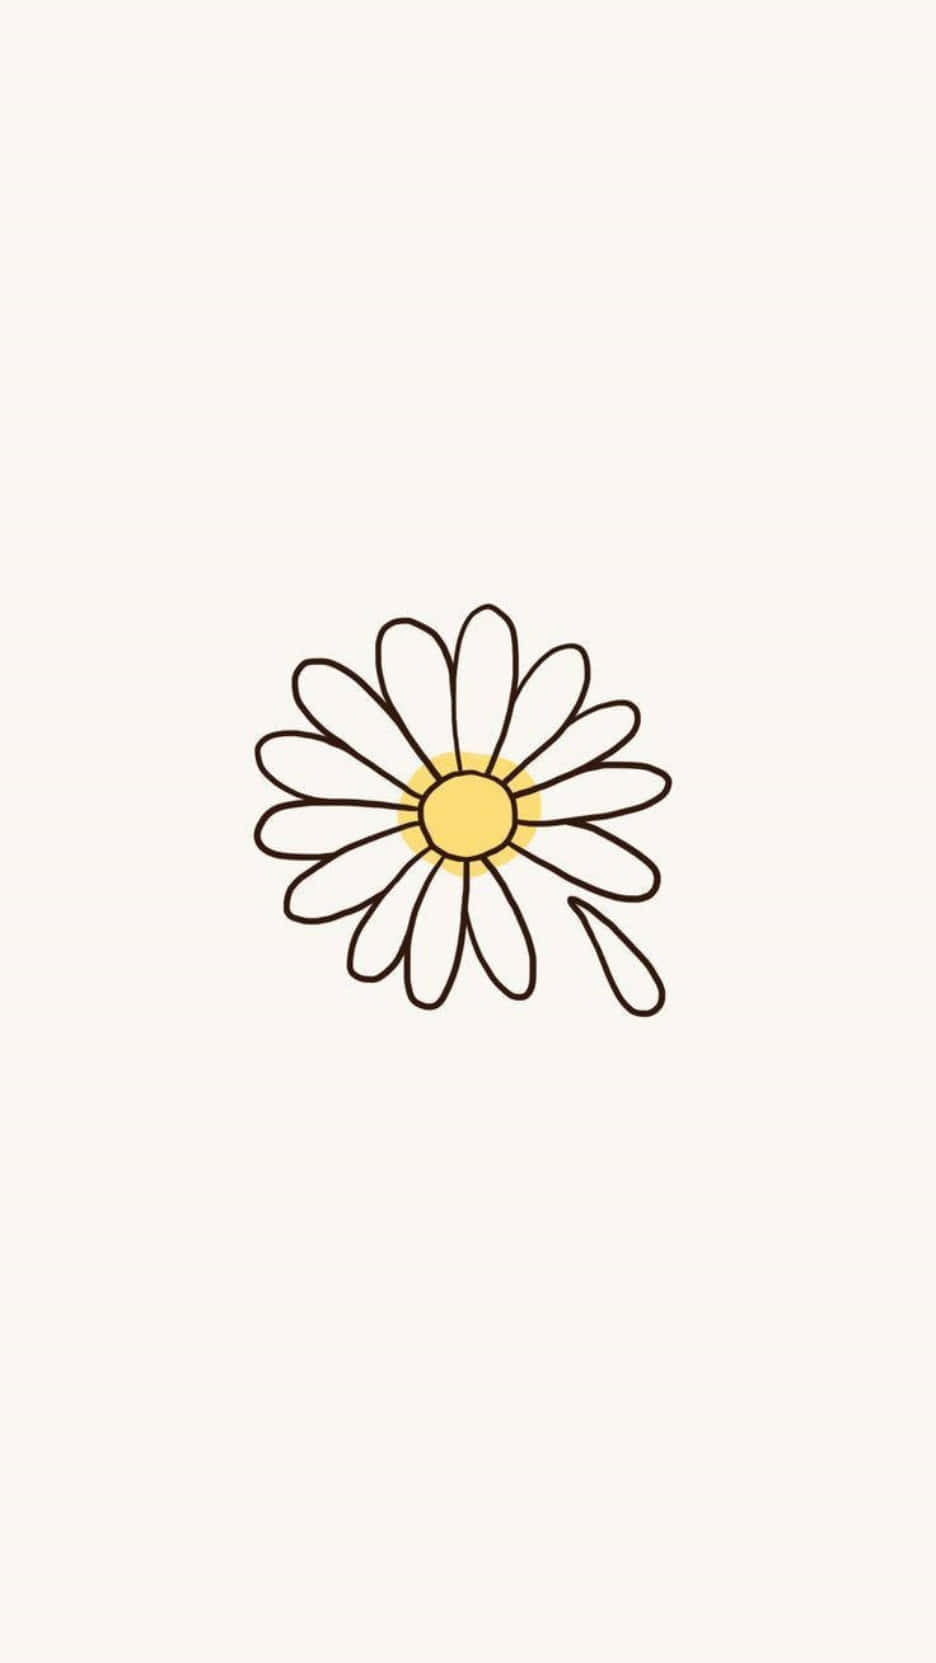 A Daisy Flower Is Drawn On A White Background